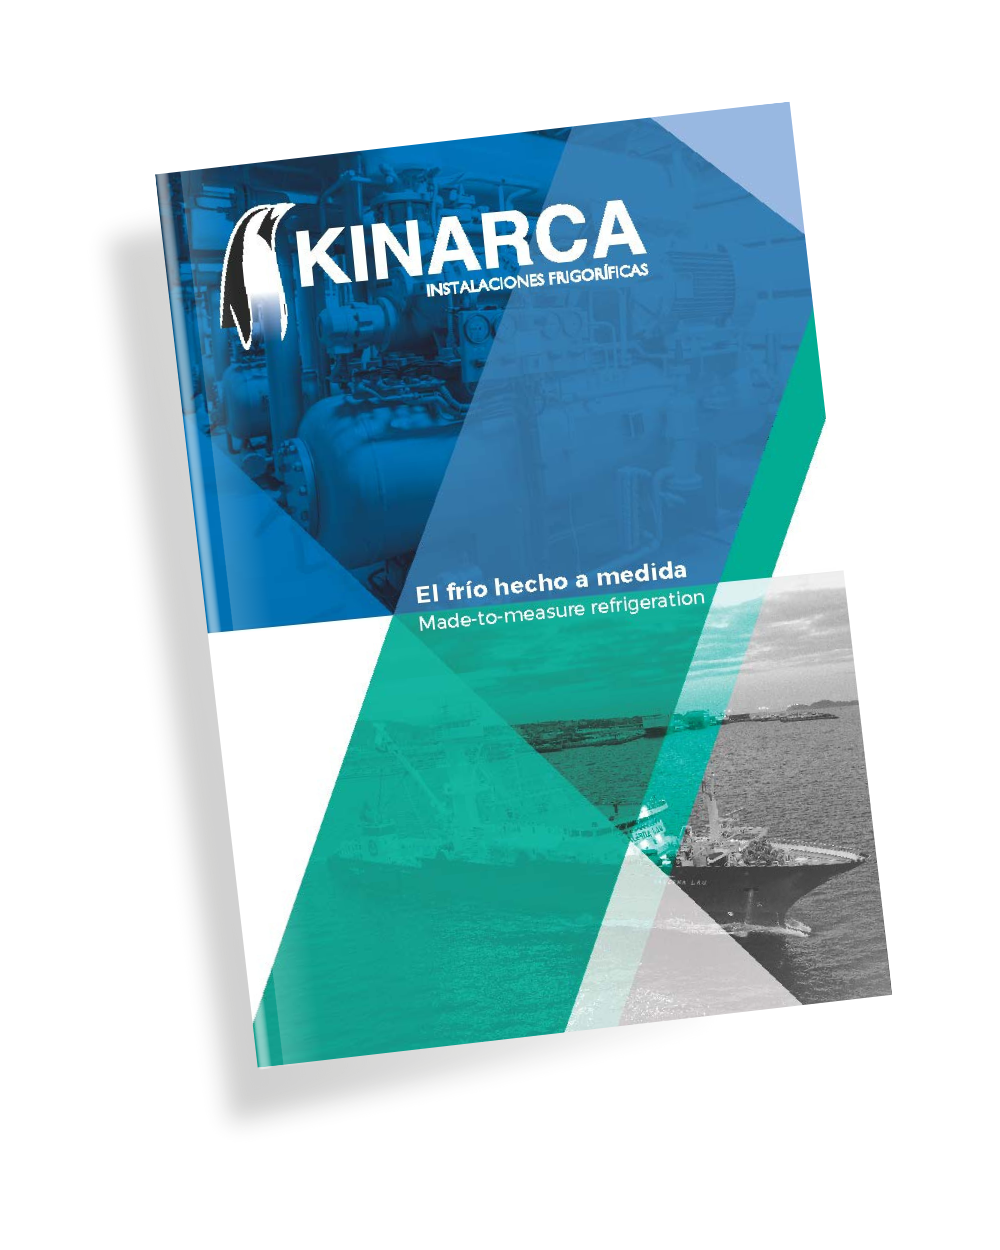 The front page of the interactive brochure of Kinarca.